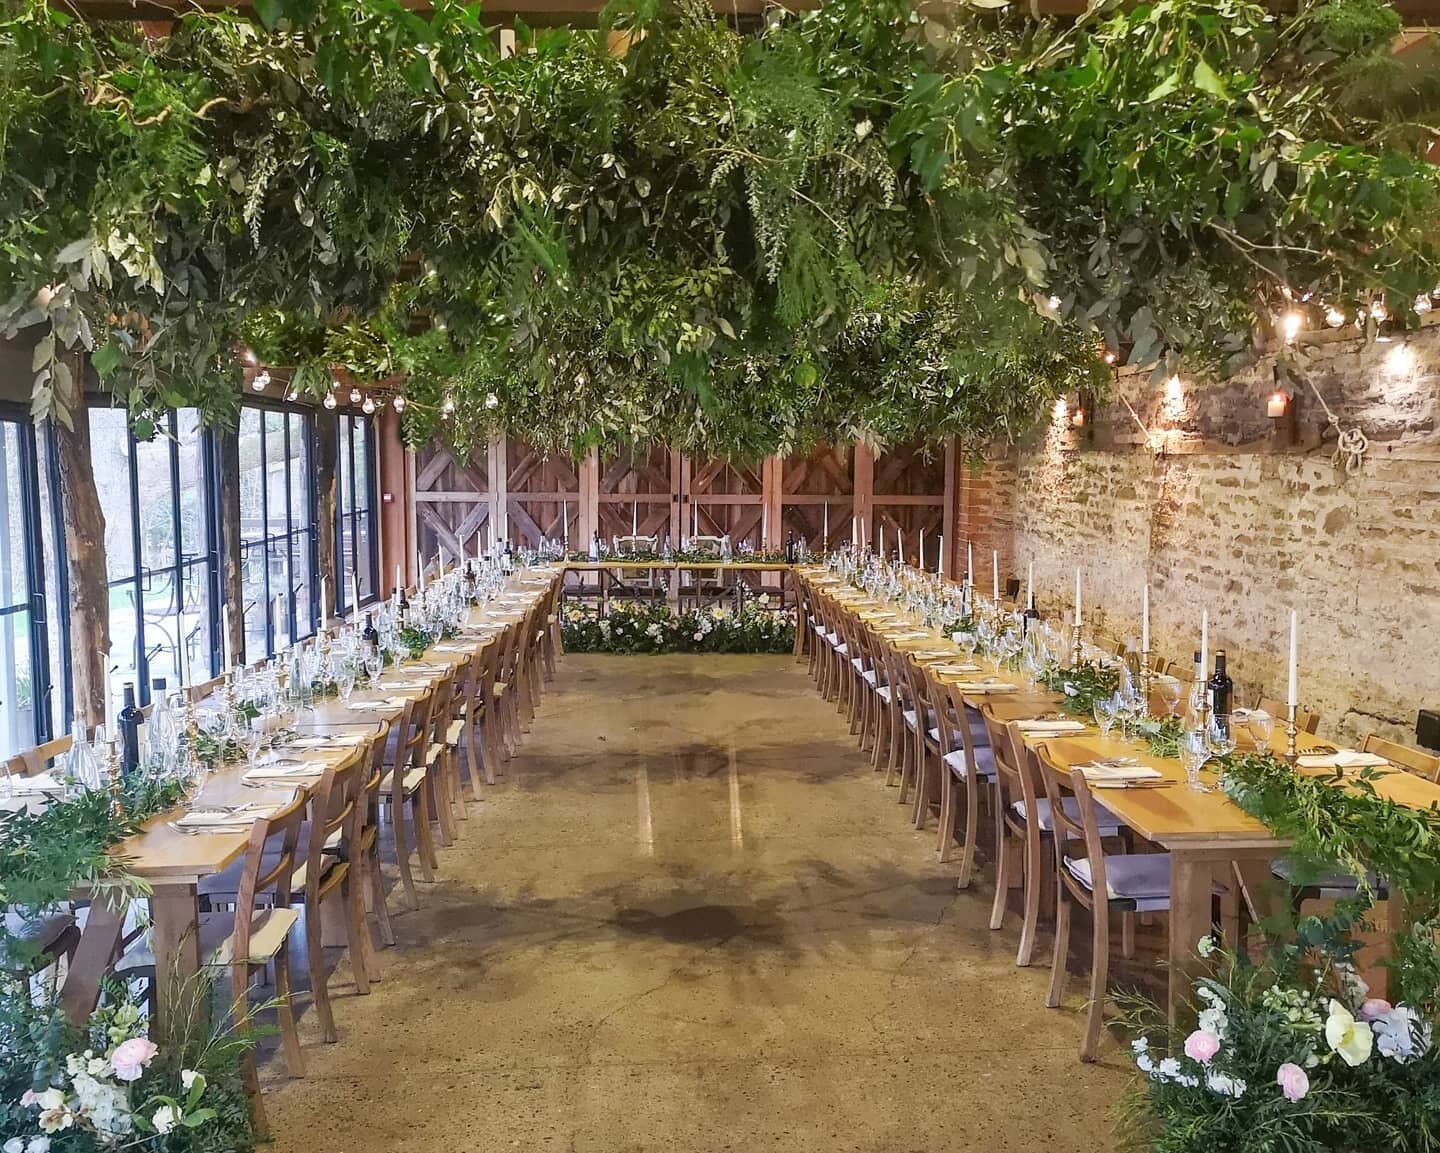 We are due to flower several weddings at Dewsall this year 🤞 Cannot wait to create more ceilings filled with scented foliage and flowers! Such a gorgeous space to design and create. This pic was taken nearly a year ago now and marks one of the last 